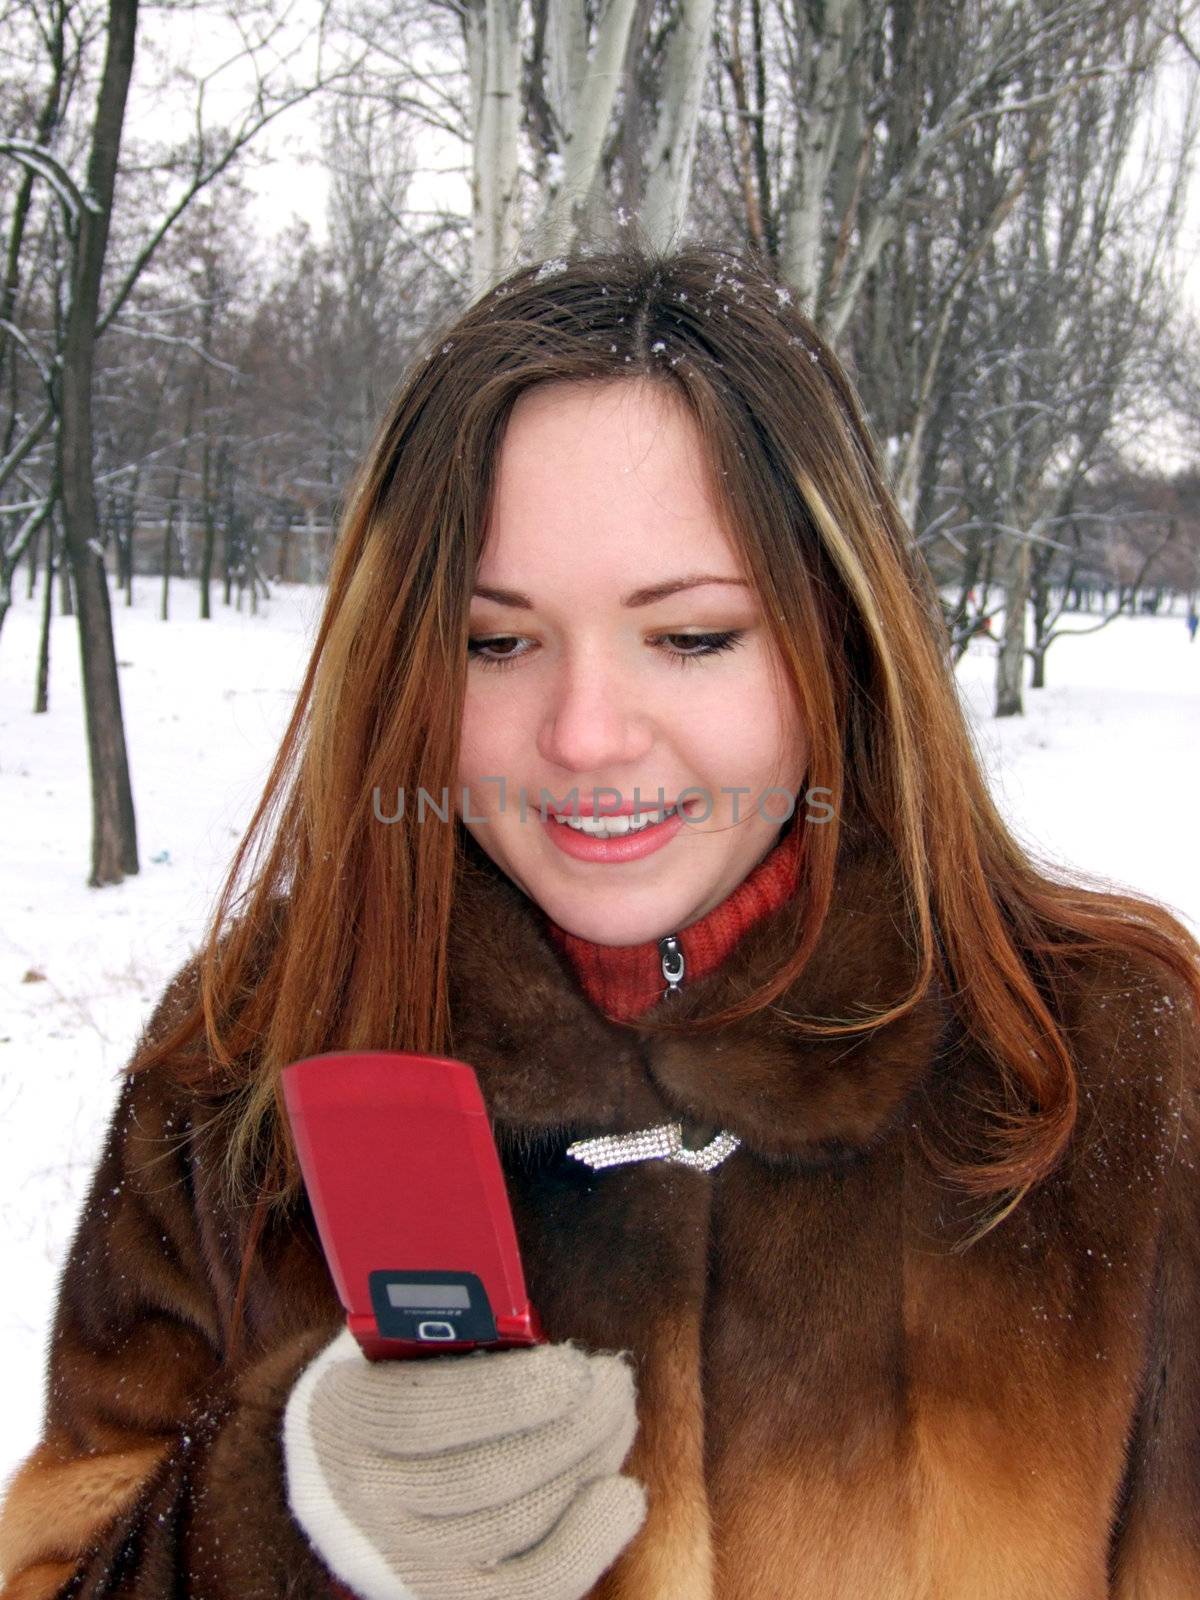 The girl in the winter in park with phone in a hand